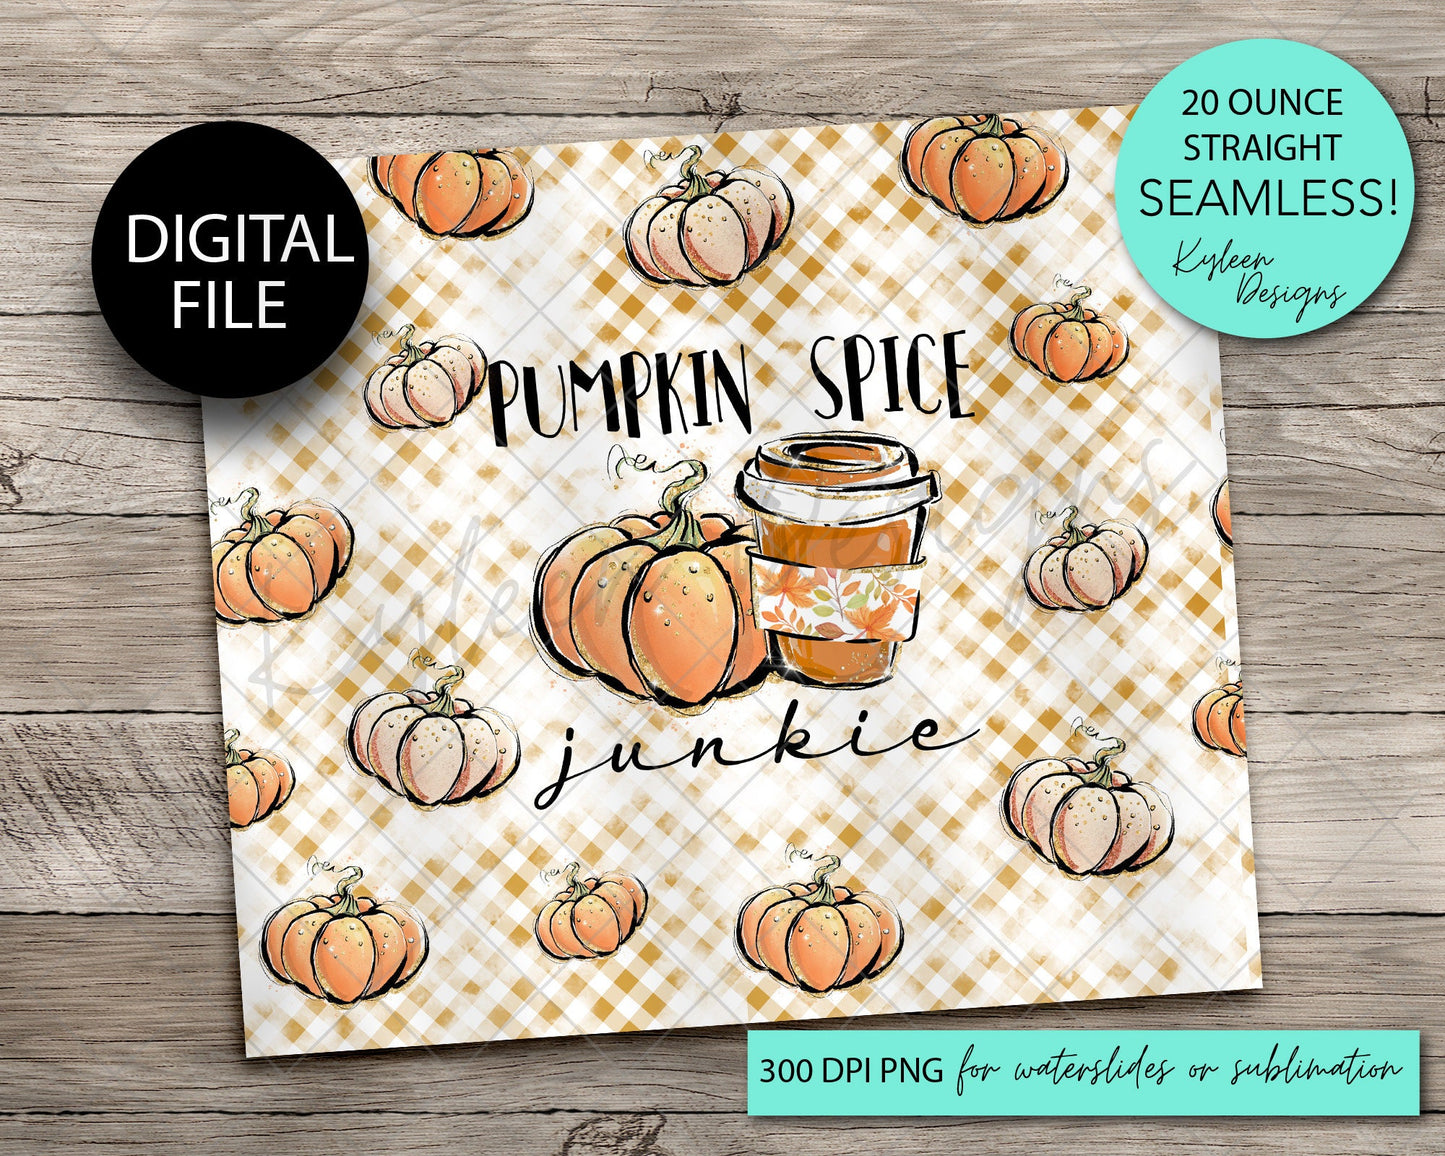 SEAMLESS pumpkin spice junkie 20 ounce tumbler wrap for sublimation, waterslide High res PNG digital file- Straight only